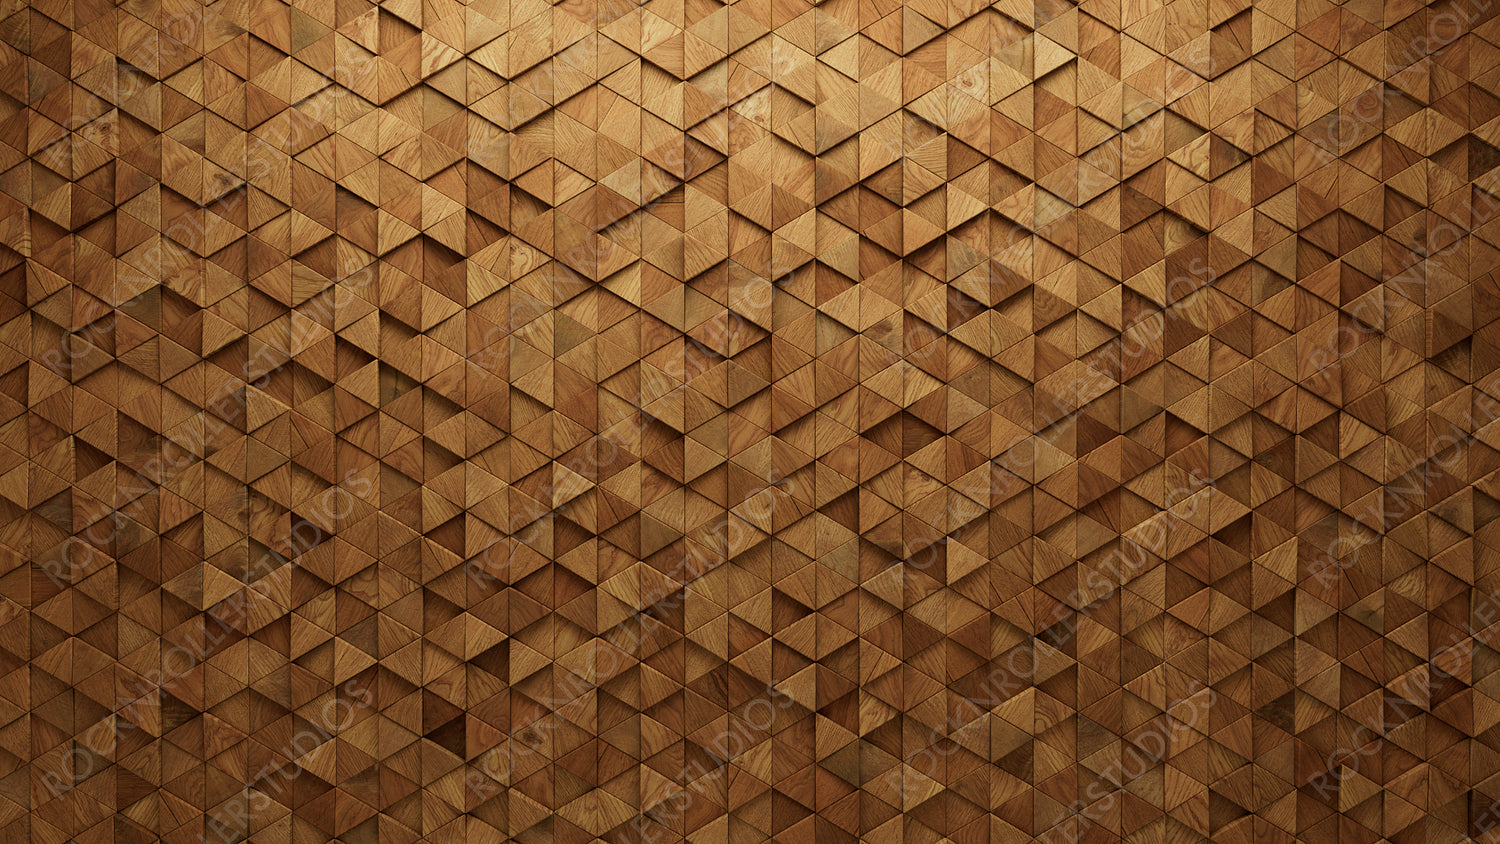 Wood, Triangular Wall background with tiles. Timber, tile Wallpaper with Natural, 3D blocks. 3D Render